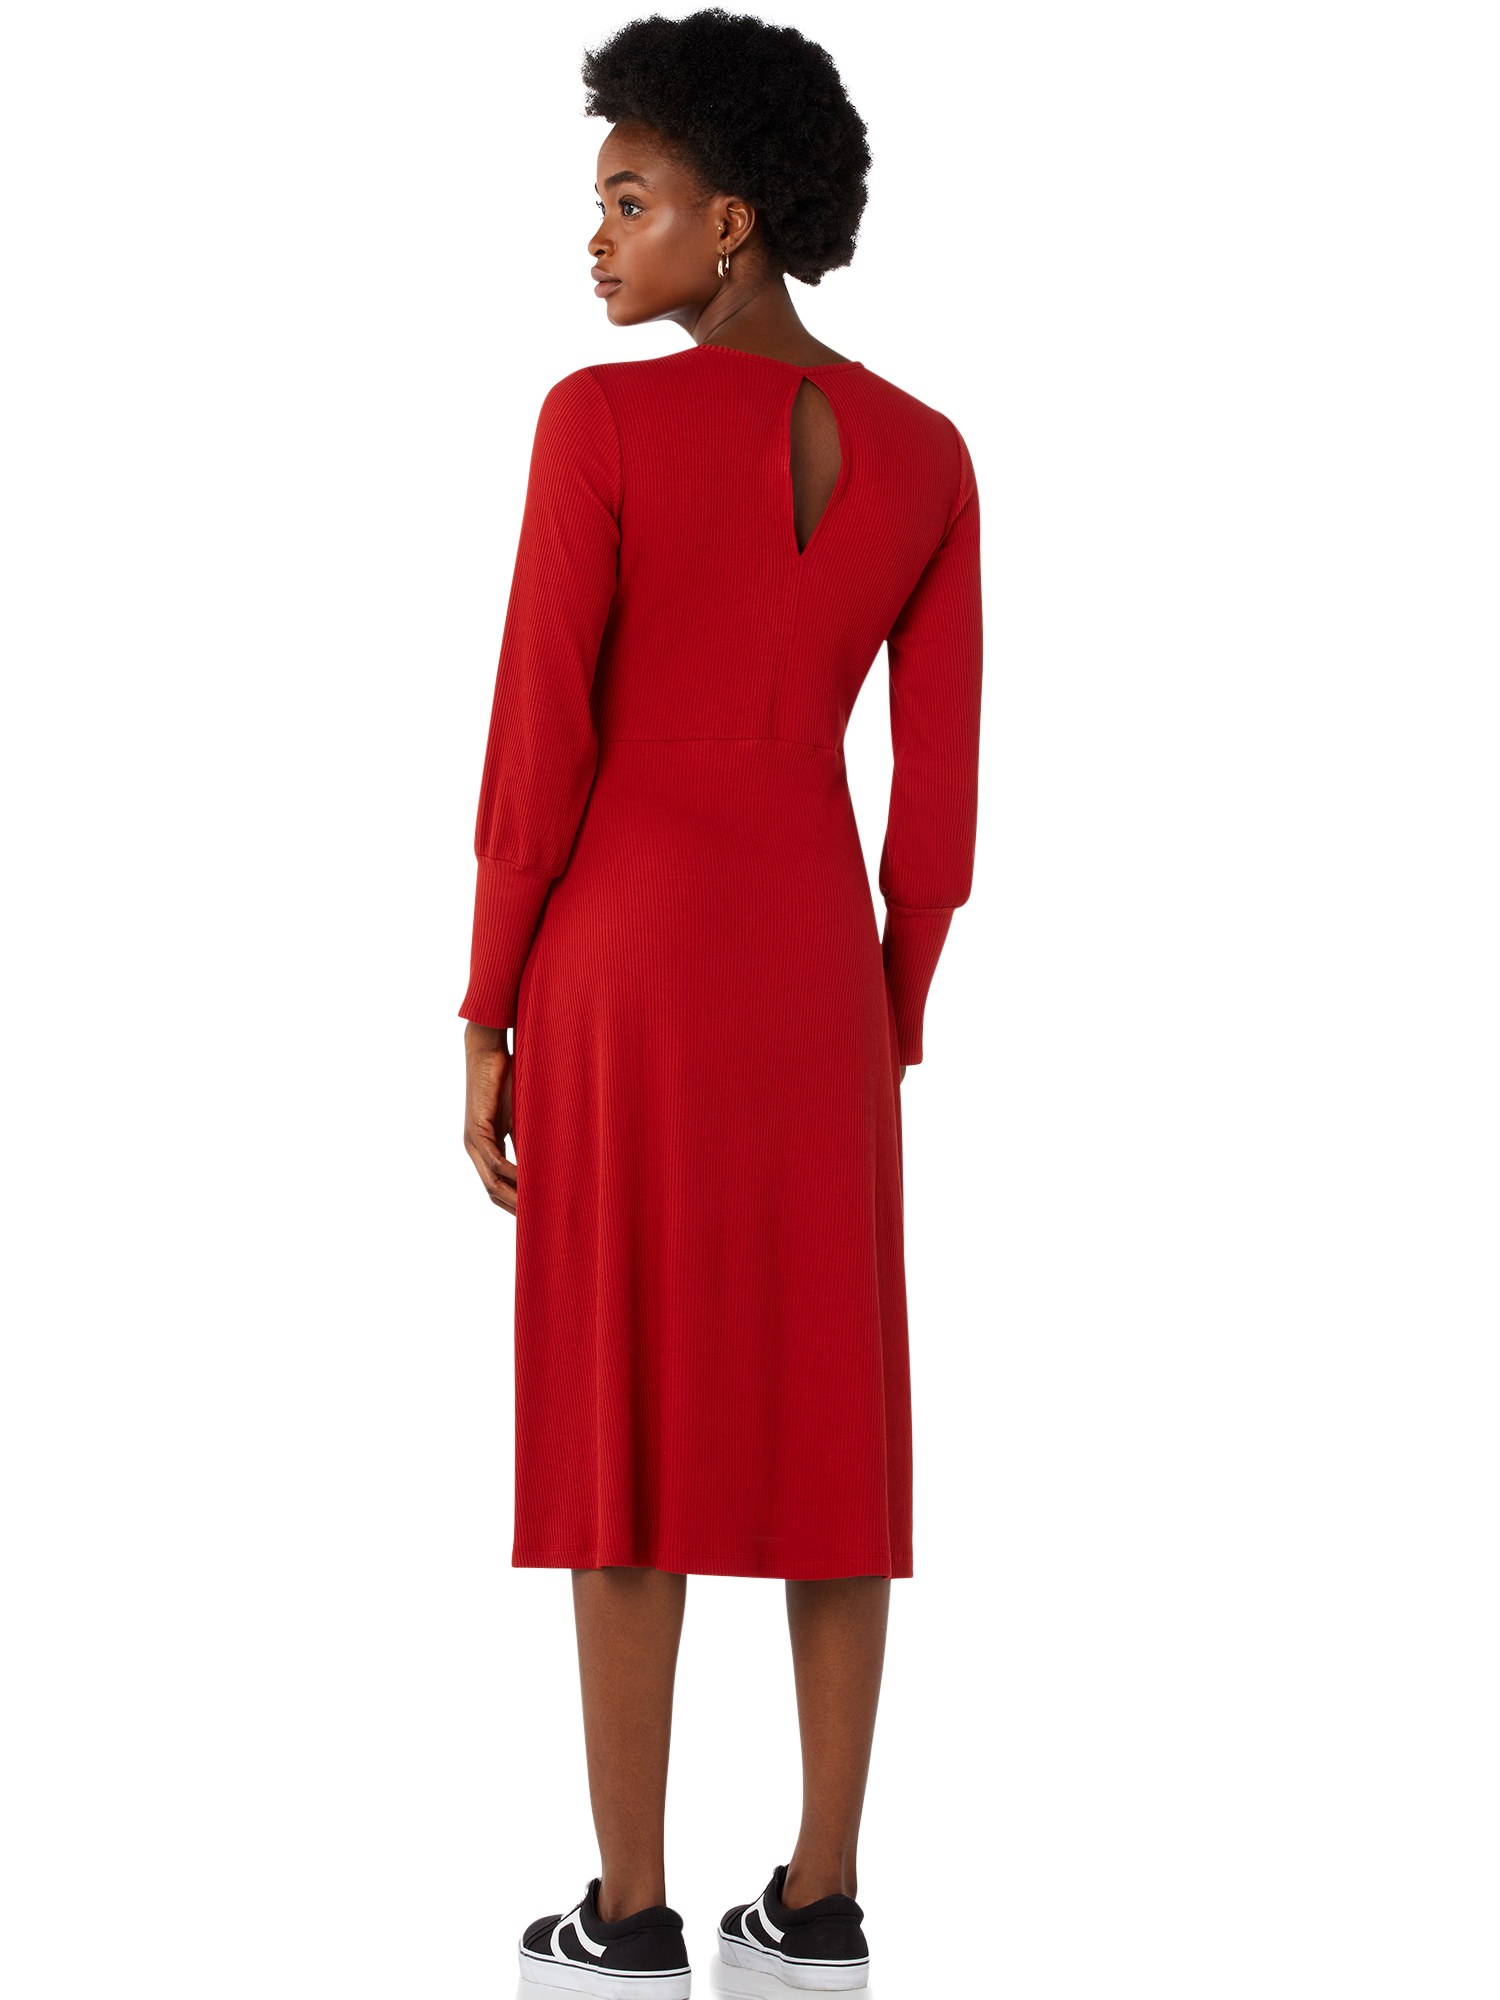 Free Assembly Women’s Fit & Flare Rib Knit Dress - image 2 of 6